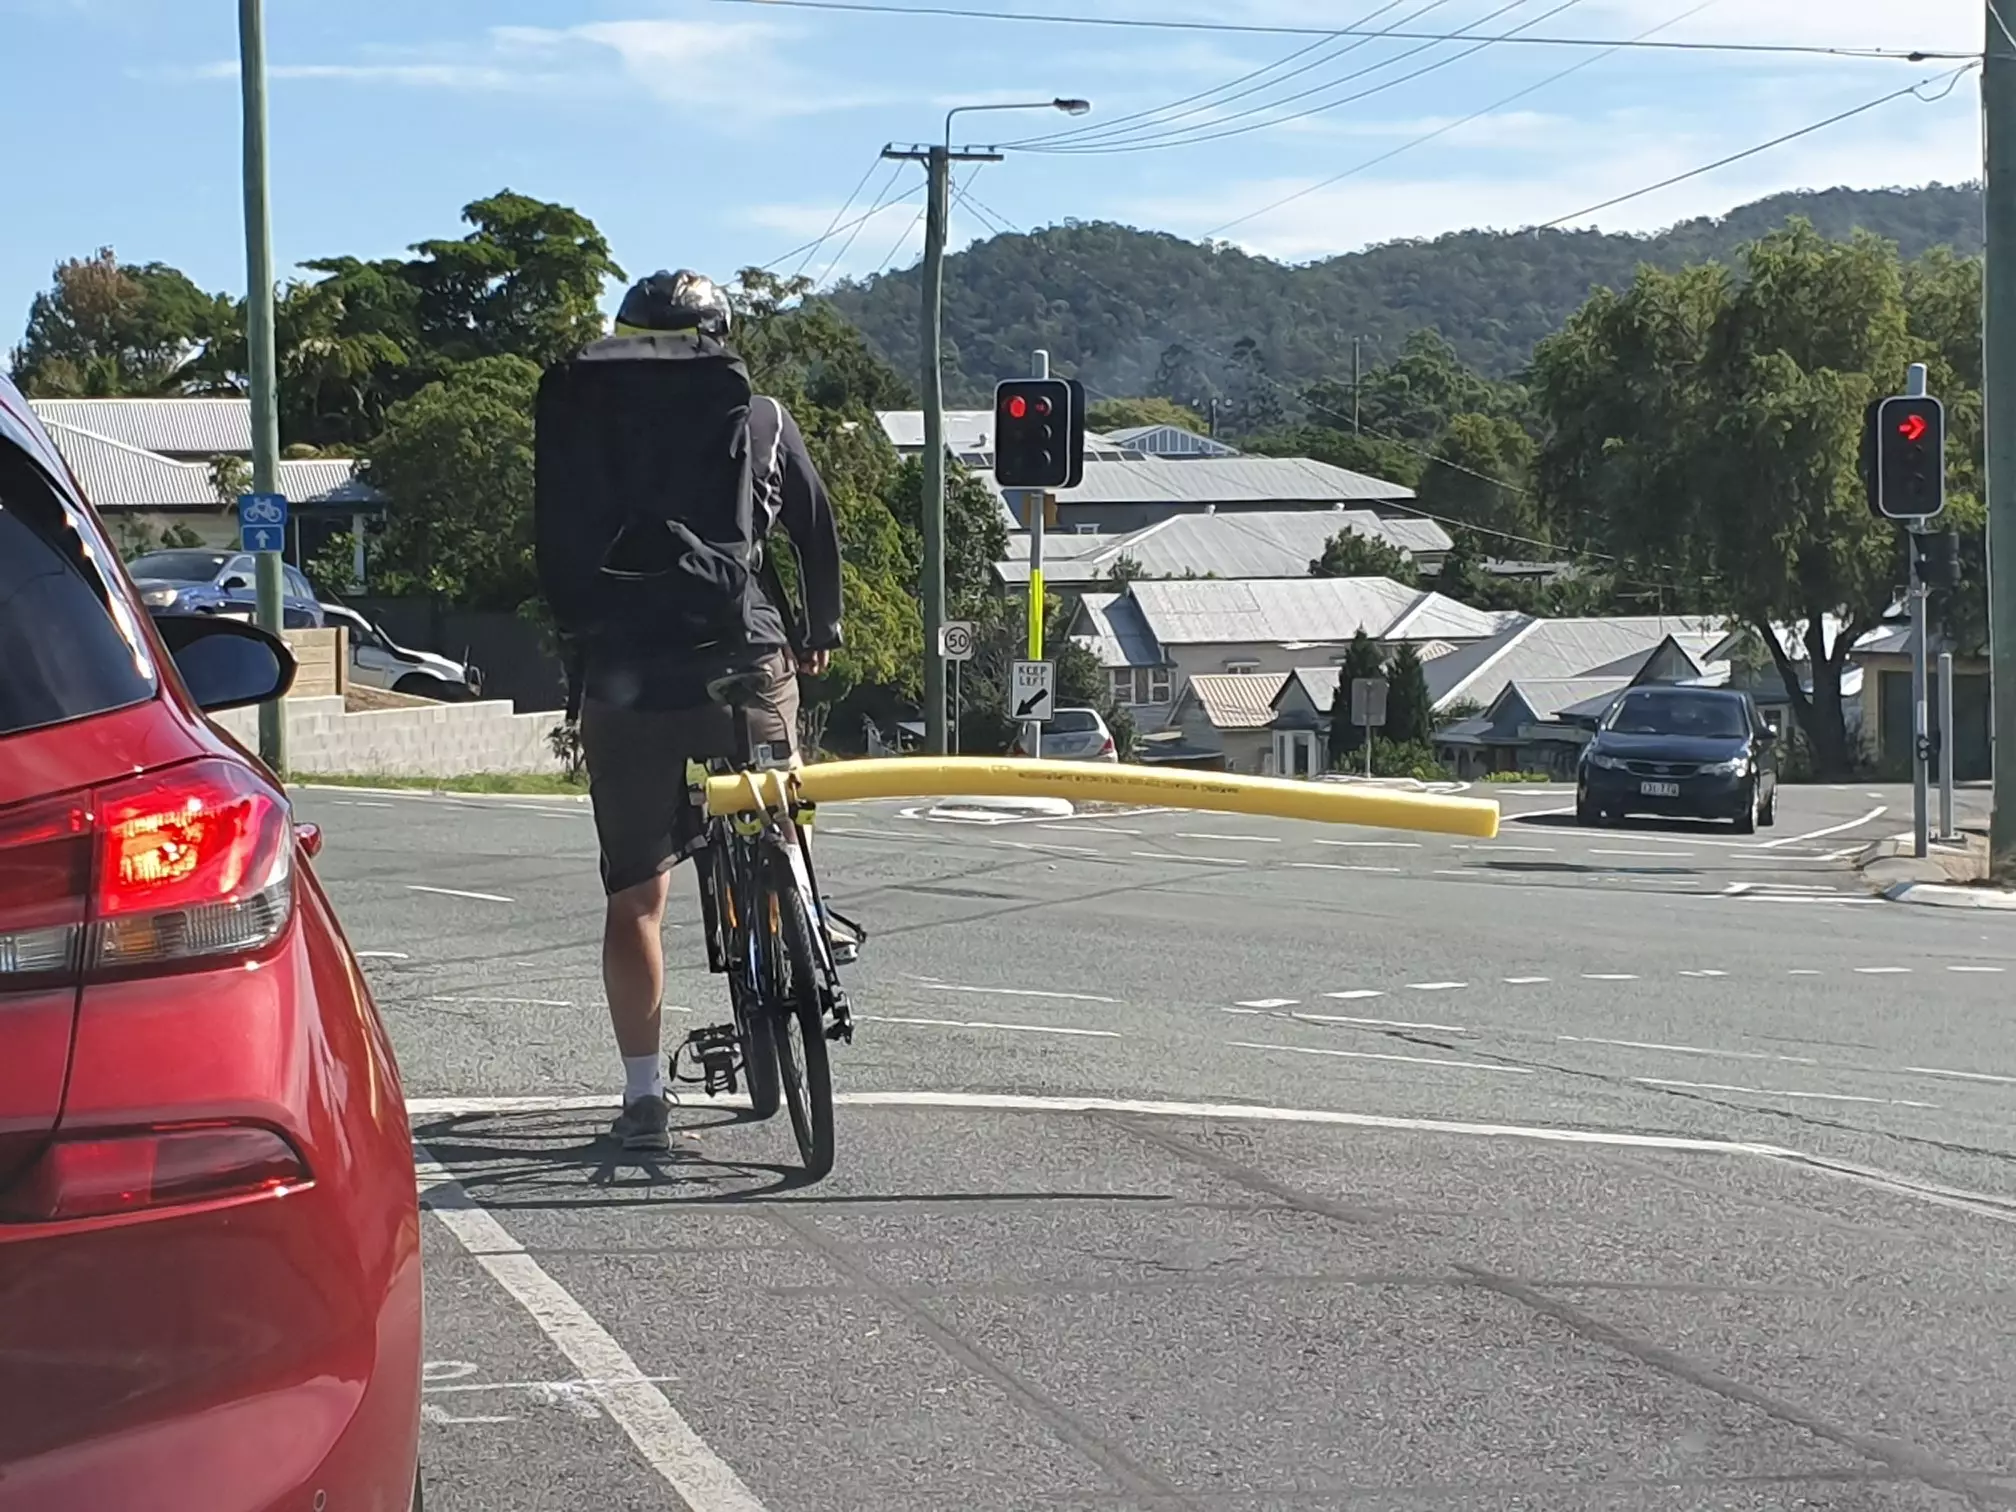 The cyclist took extreme measures to keep cars at a safe distance.